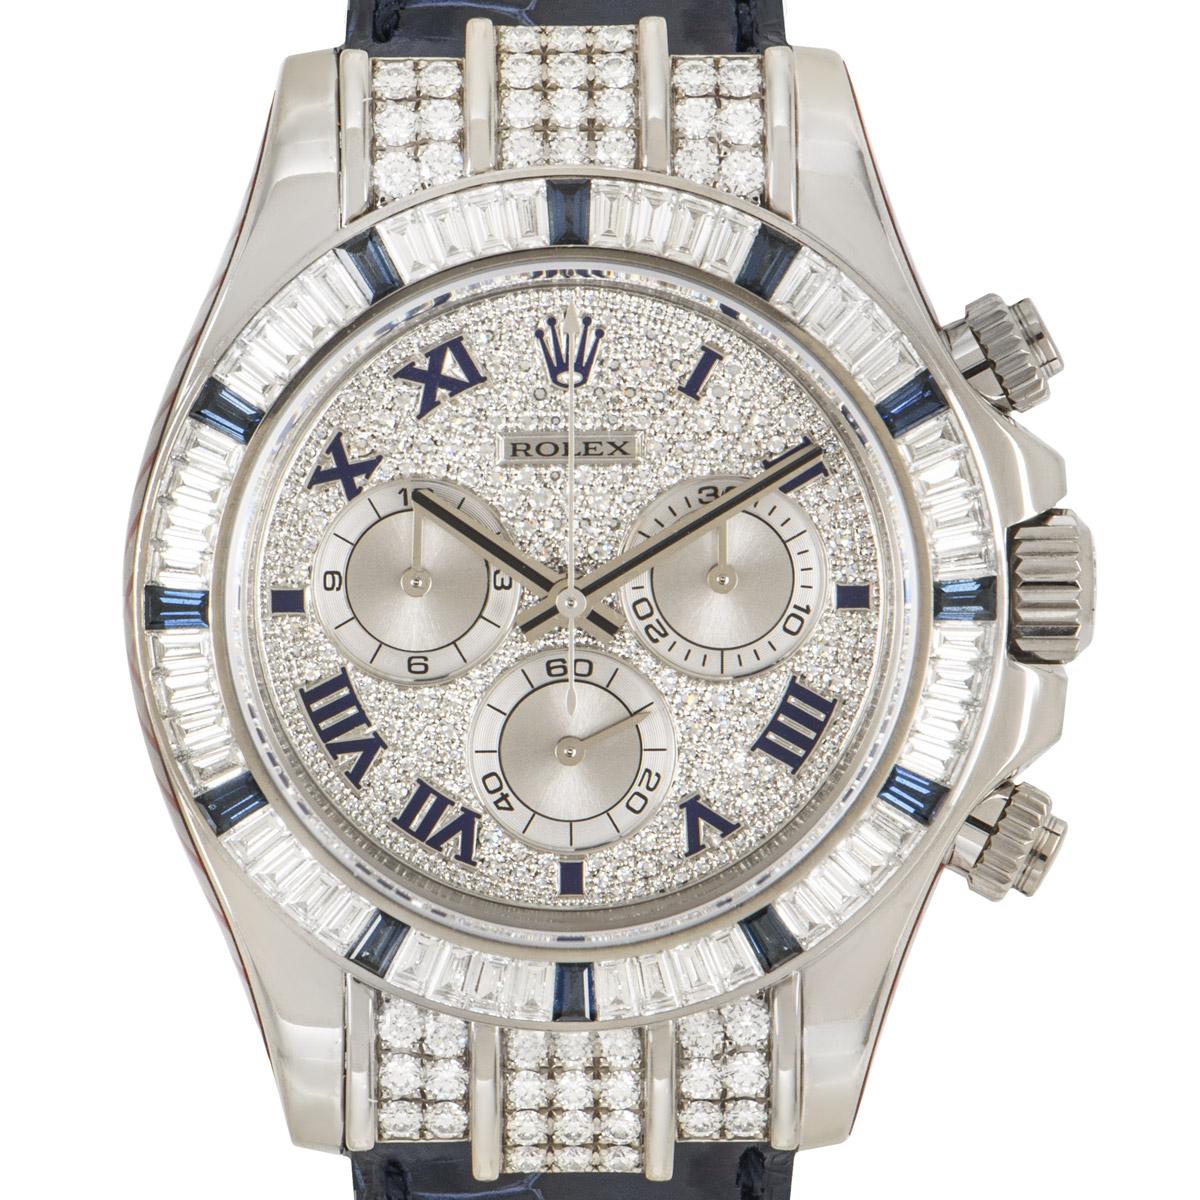 A stunning diamond and sapphire set Daytona crafted in white gold by Rolex. Features a pave diamond dial with roman applied numerals, 3 sub dials featuring a 30 minute and 12 hour recorder as well as a small seconds. Complimenting the dial is a